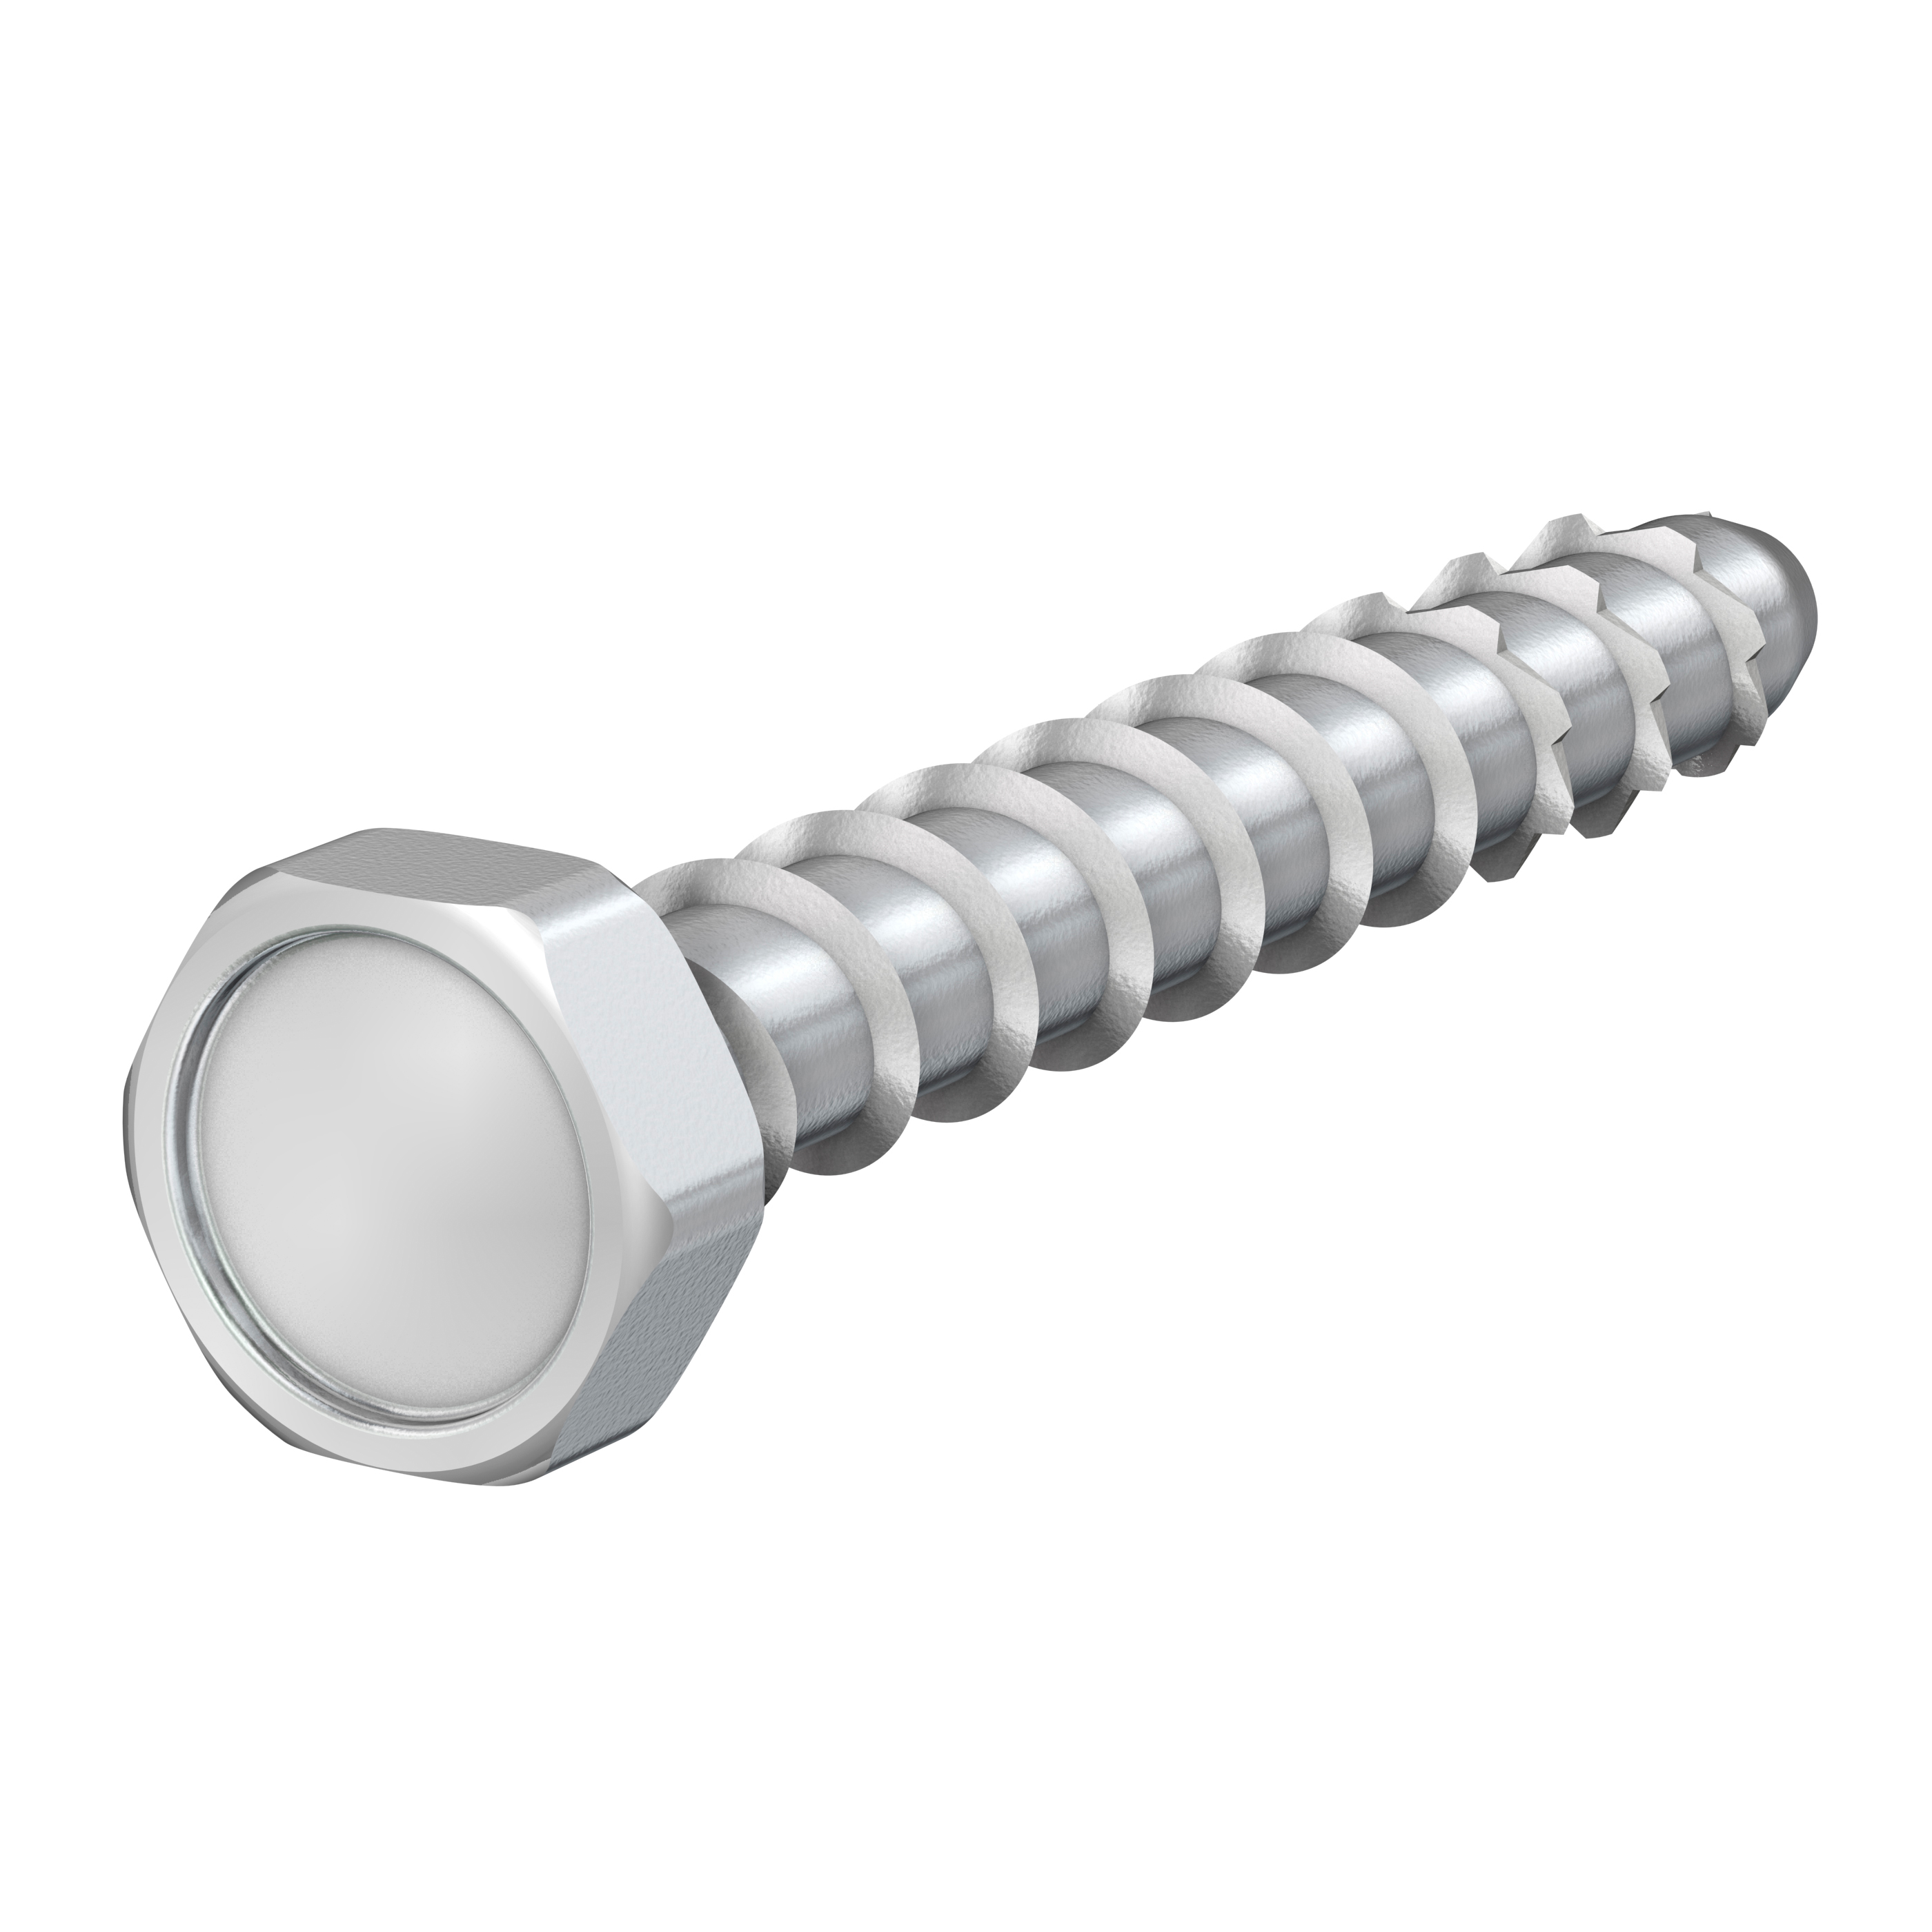 SCS Self Tapping Concrete Screw